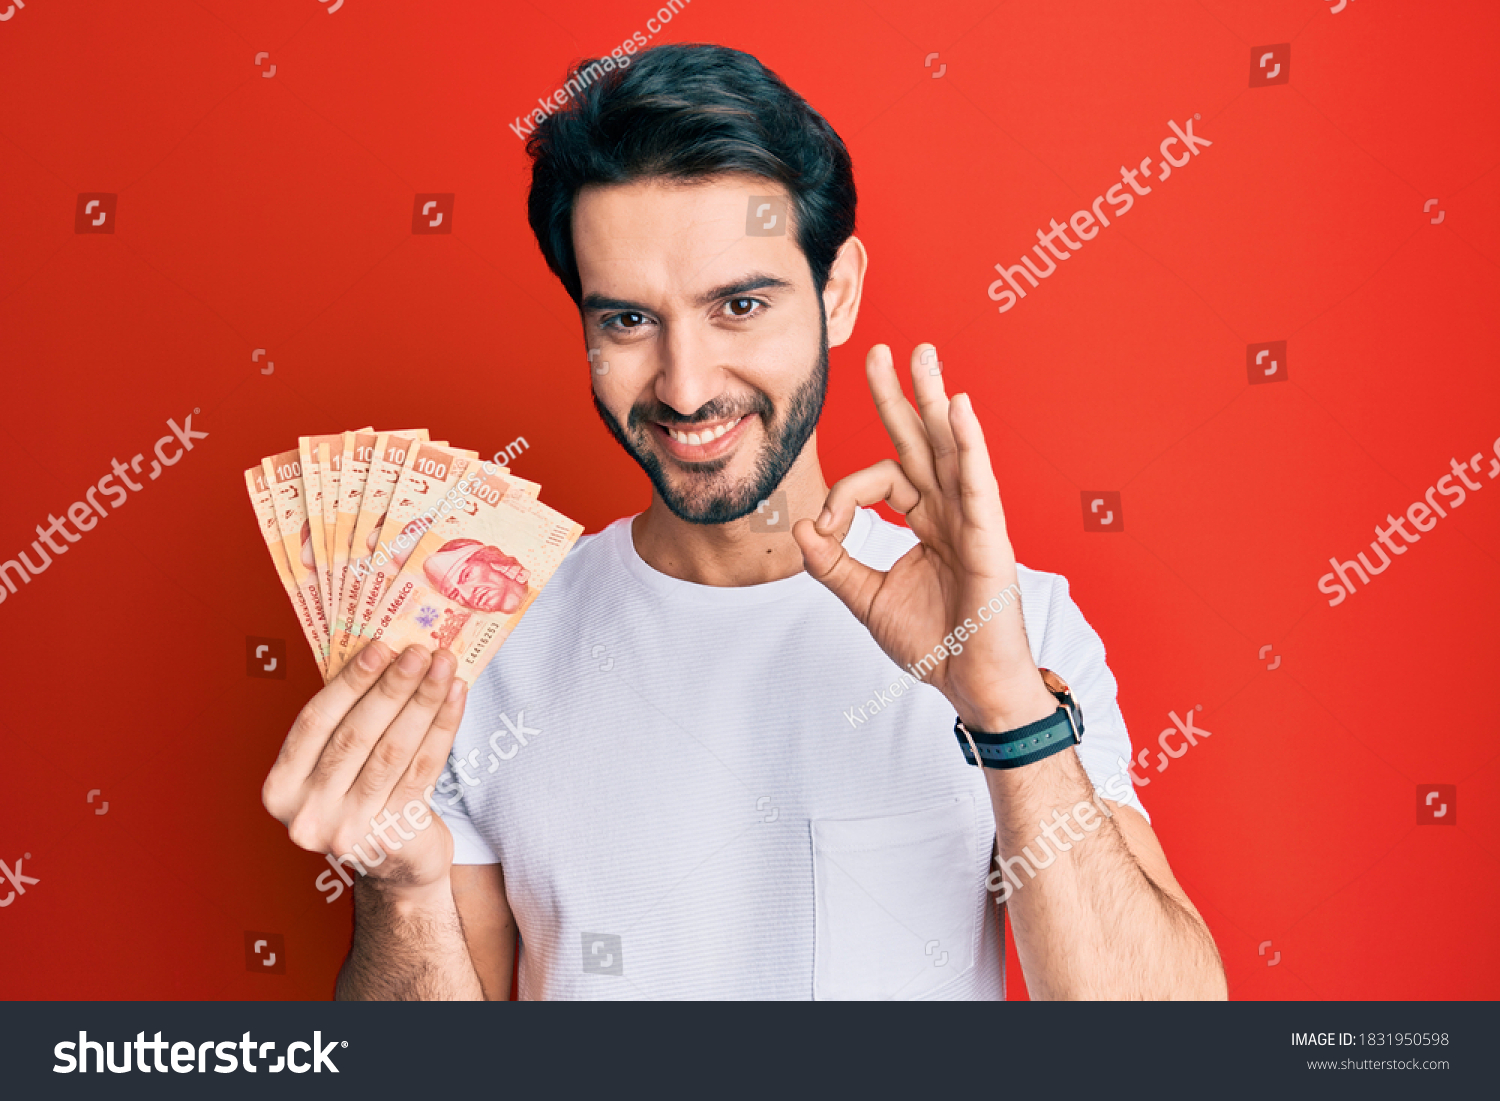 16,306 Peso money investment Images, Stock Photos & Vectors Shutterstock